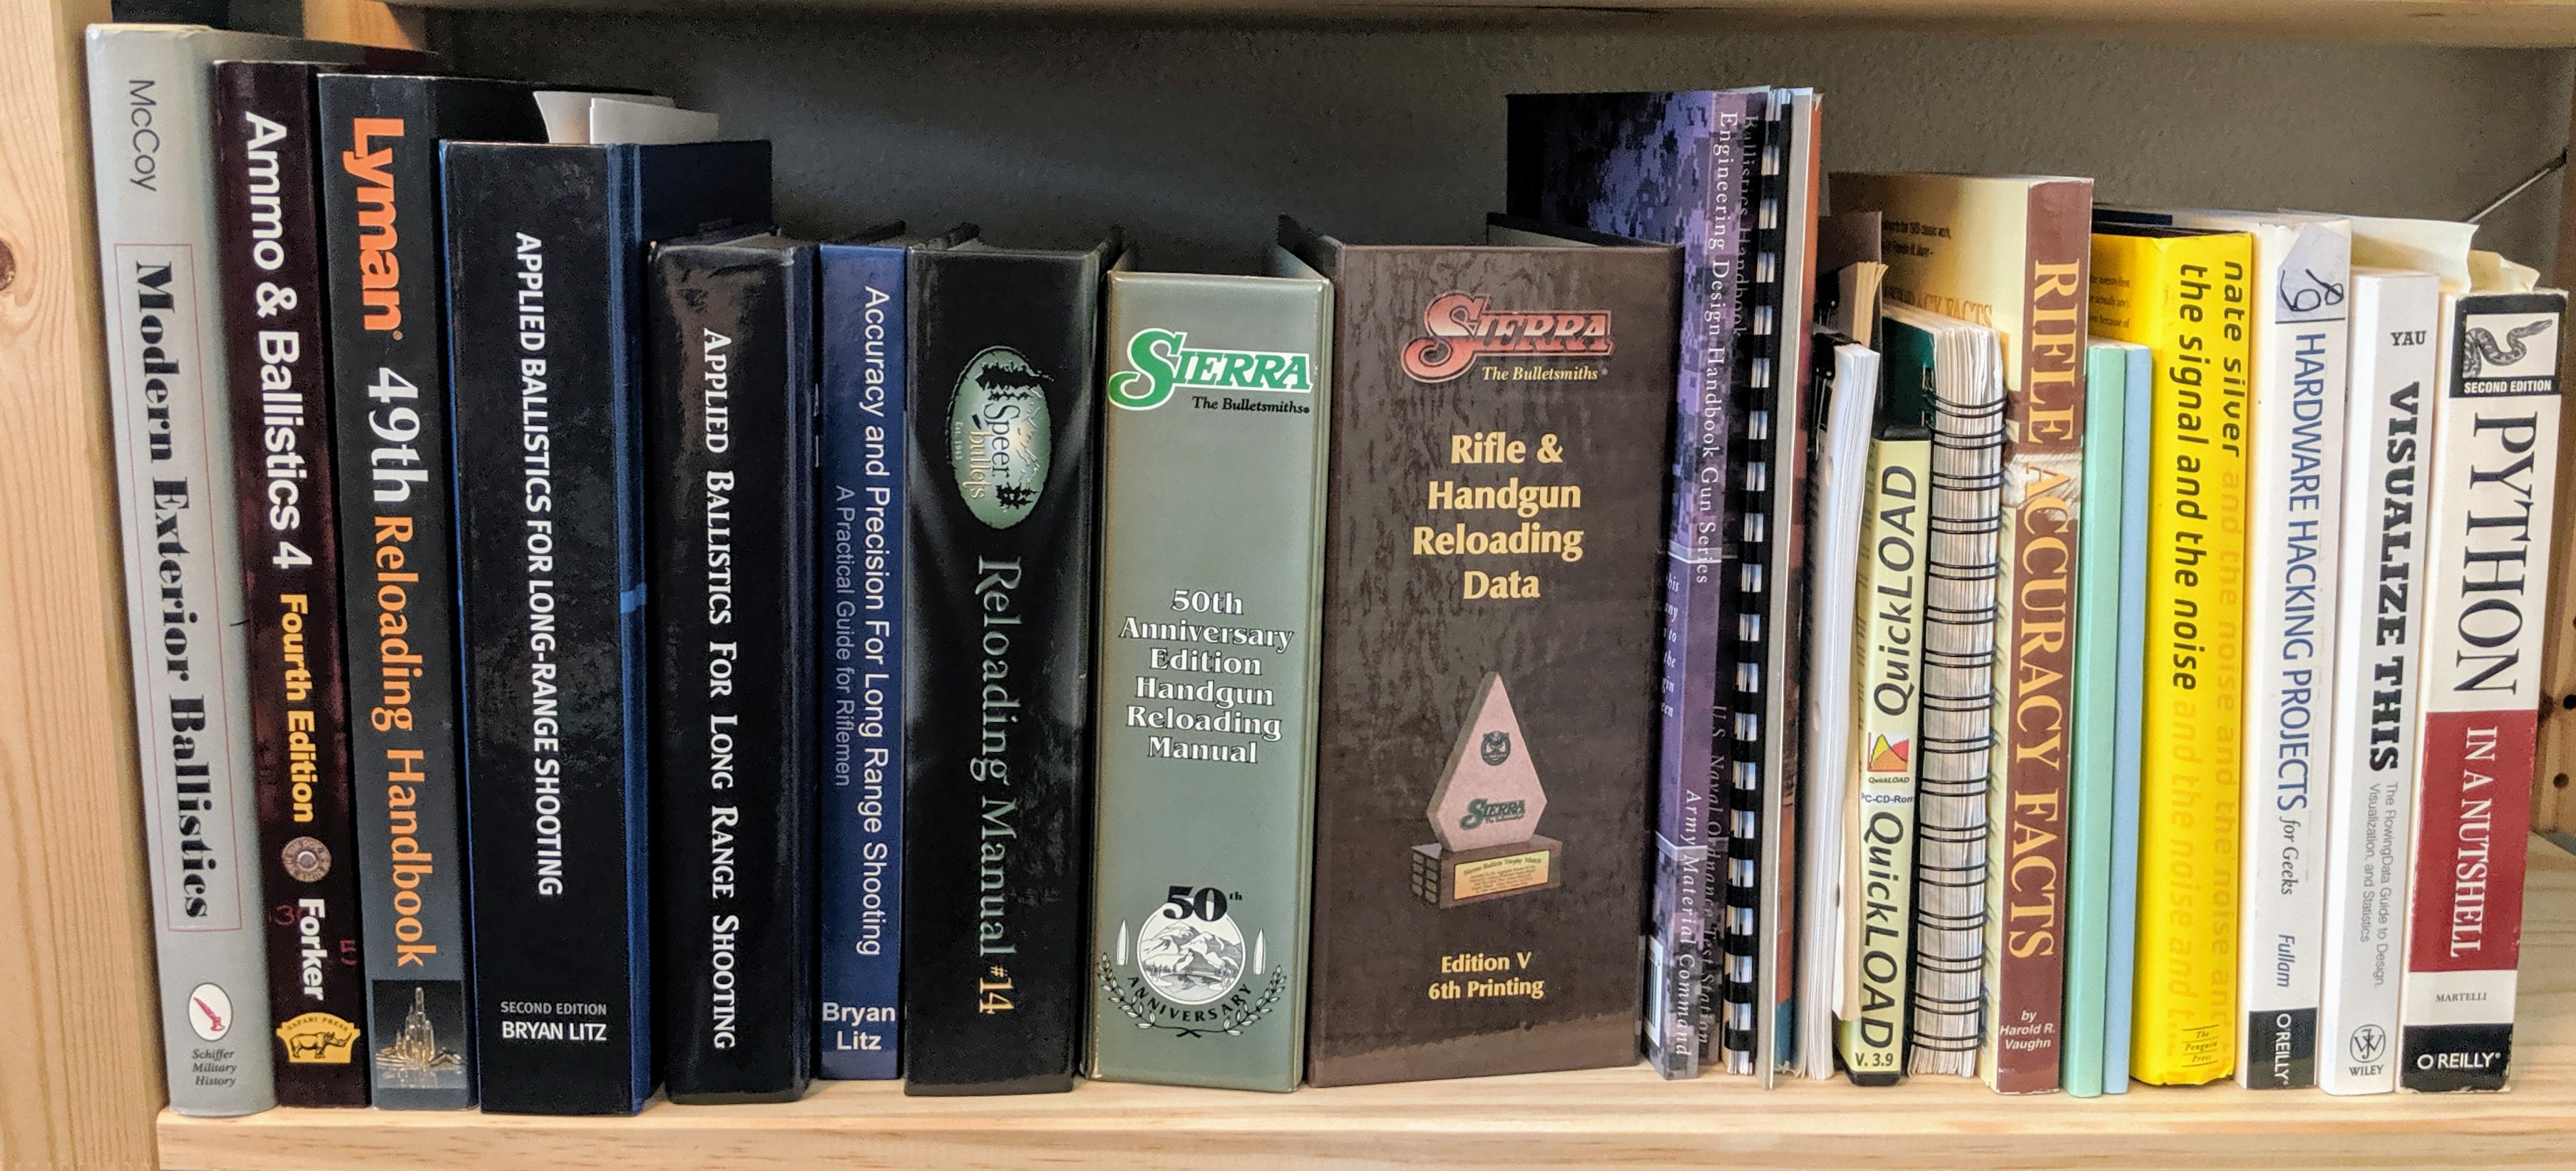 Some of the books on my shelf which I reference frequently for Ammolytics